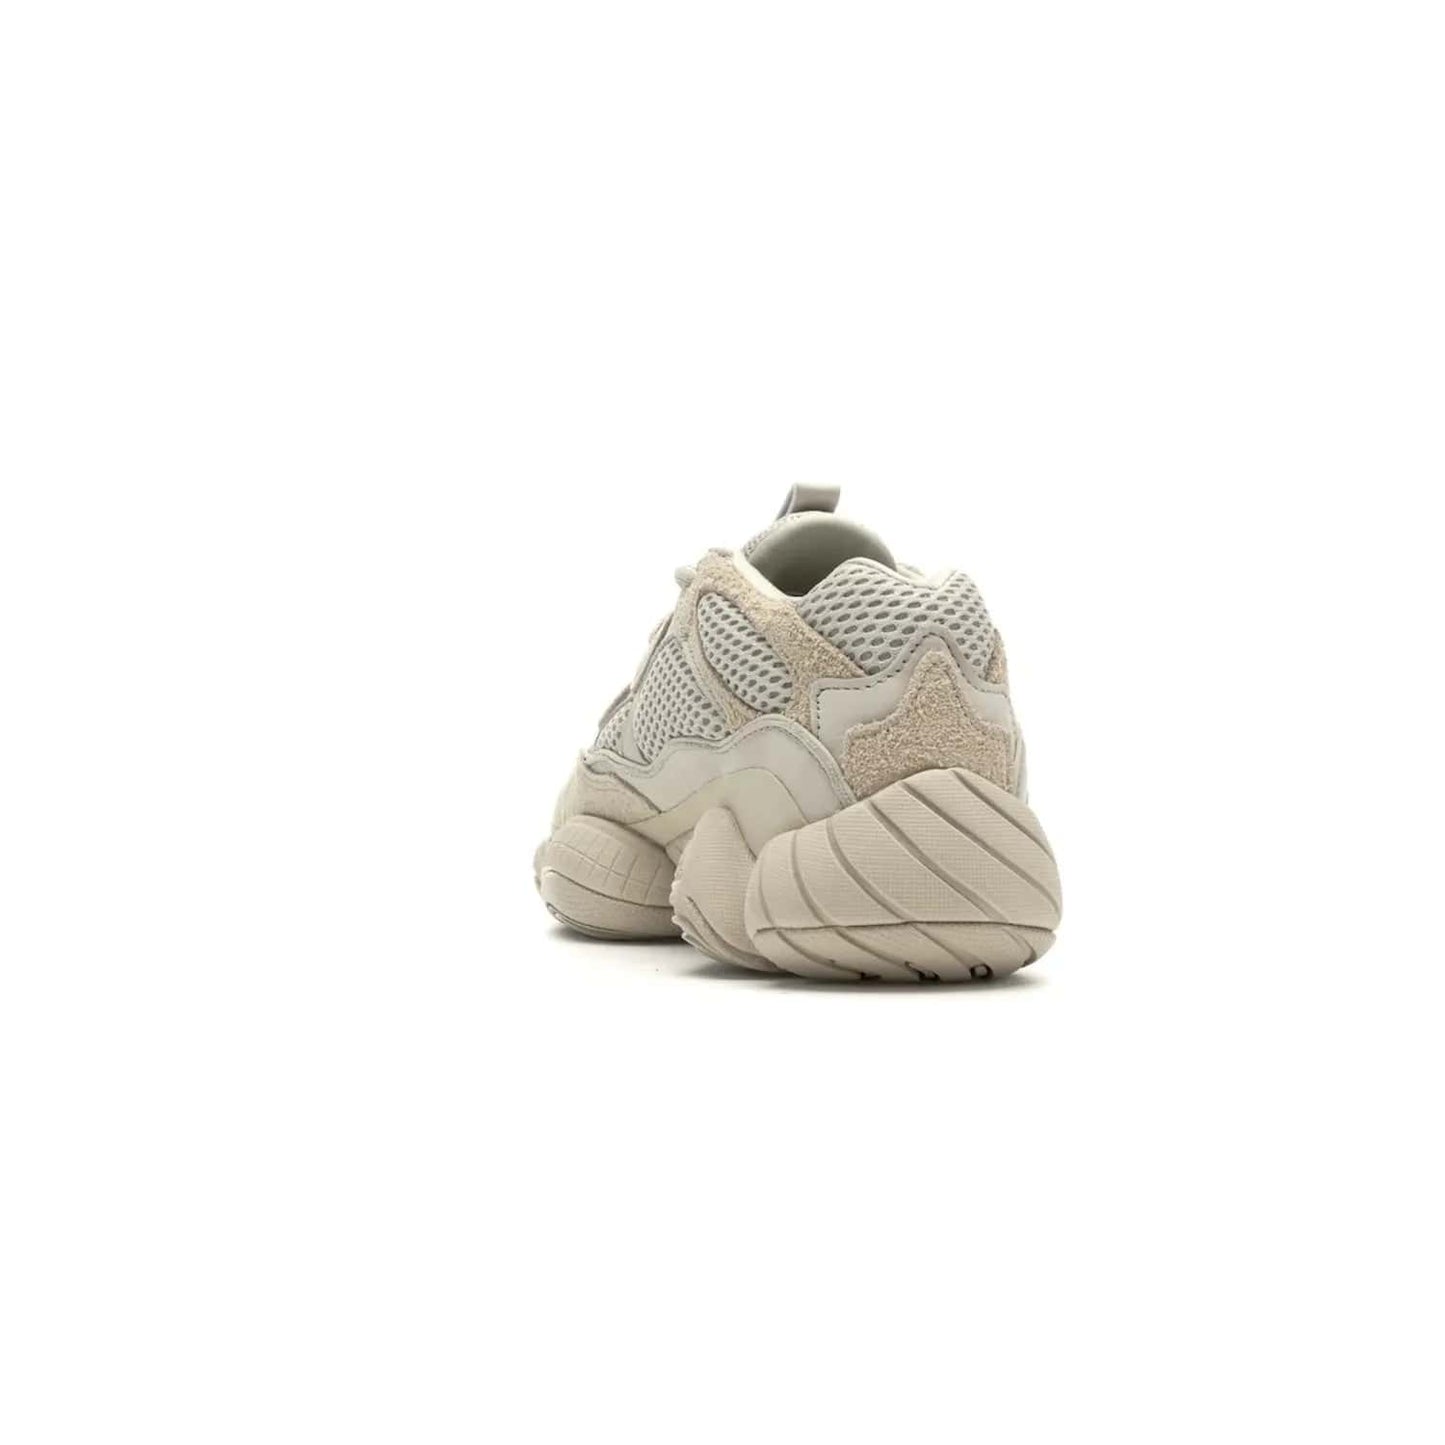 adidas Yeezy 500 Blush - Image 26 - Only at www.BallersClubKickz.com - Step up your sneaker game with the Adidas Yeezy 500 Blush. Monochromatic pale pink palette, hiking-inspired suede/mesh construction, plus adiPRENE sole for comfort and performance. Get the Adidas Yeezy 500 and experience true style and comfort.